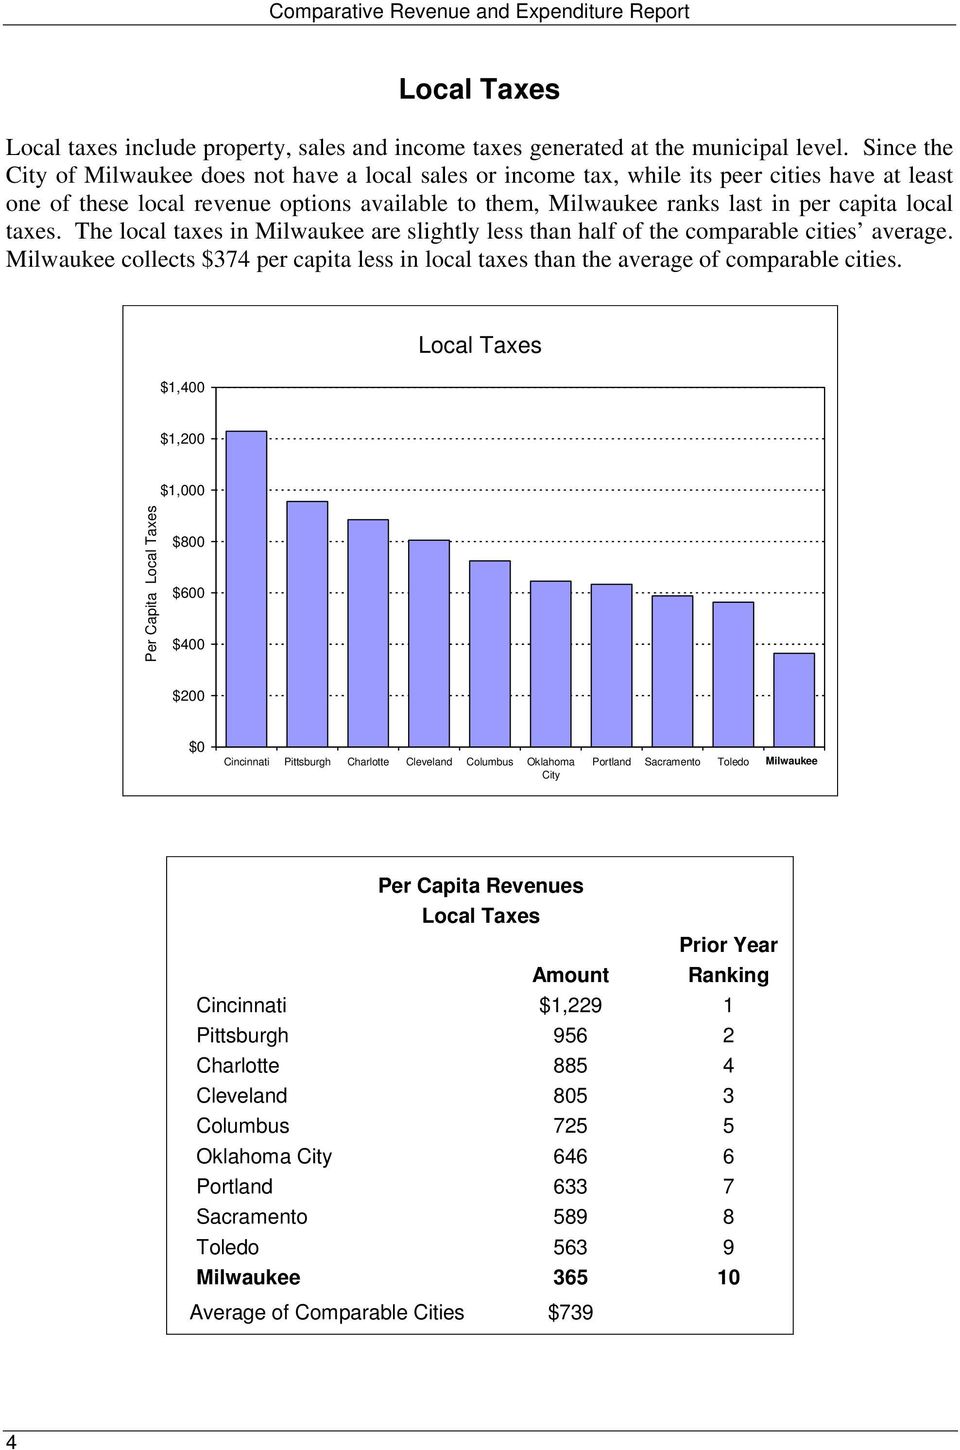 taxes. The local taxes in Milwaukee are slightly less than half of the comparable cities average. Milwaukee collects $374 per capita less in local taxes than the average of comparable cities.